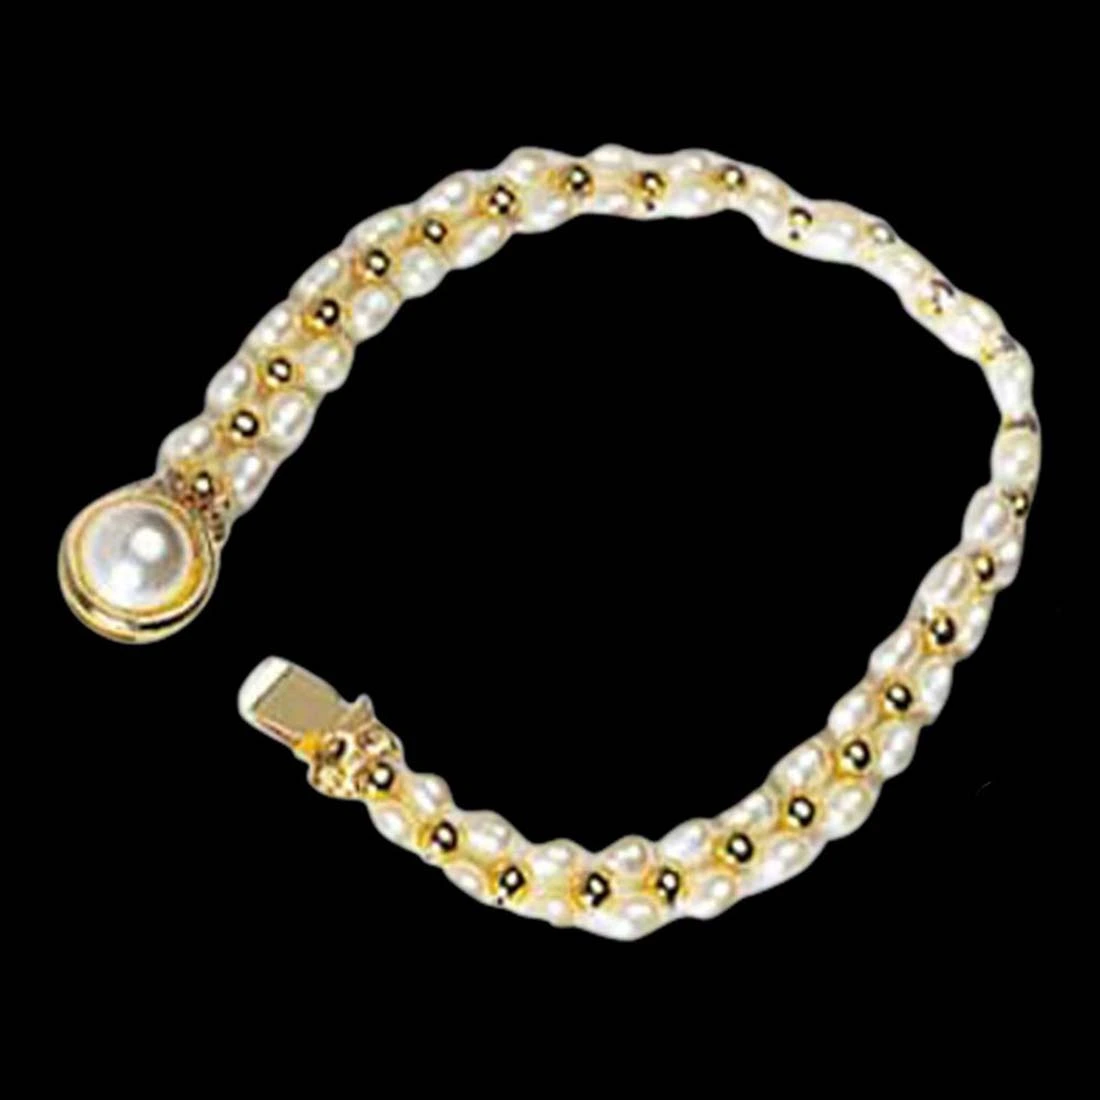 Hypnotize - Real Freshwater Pearl & Gold Plated Beads Necklace, Bracelet & Earring Set for Women (SP84)